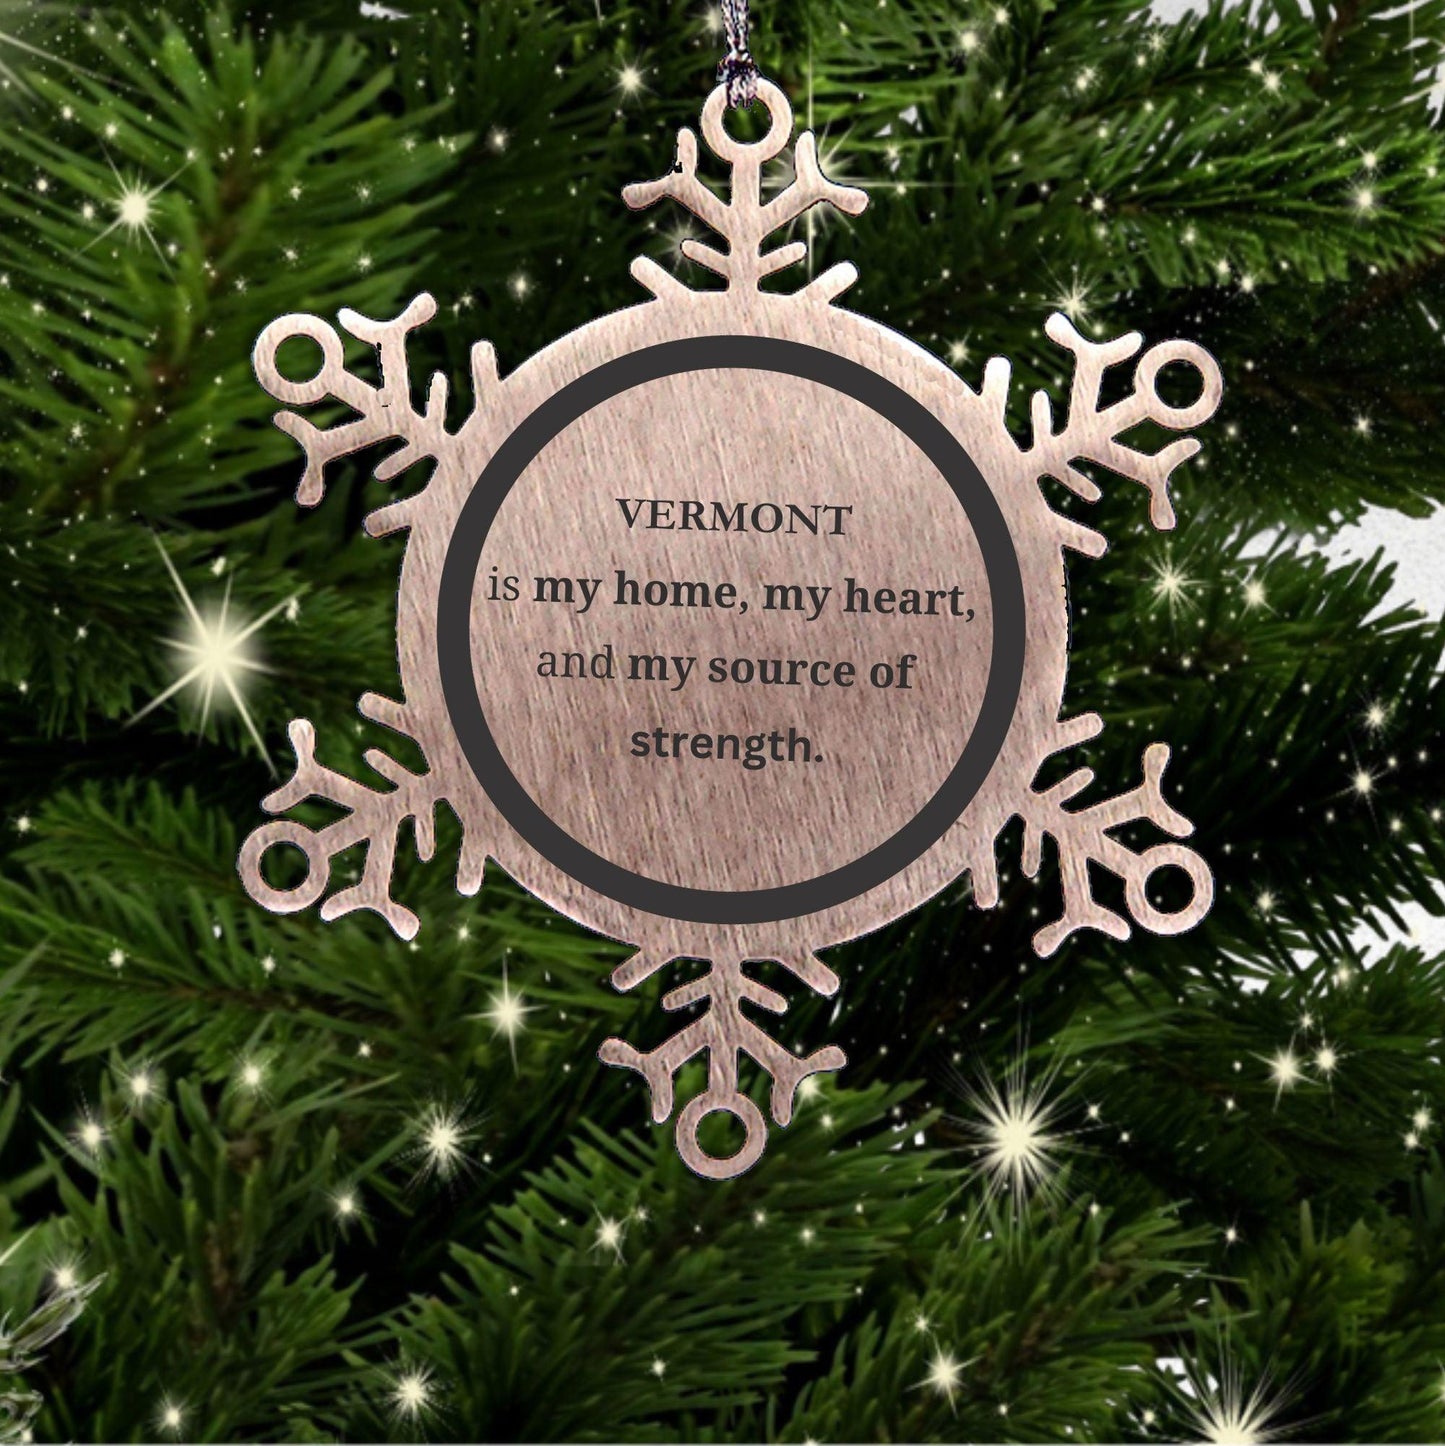 Vermont is my home Gifts, Lovely Vermont Birthday Christmas Snowflake Ornament For People from Vermont, Men, Women, Friends - Mallard Moon Gift Shop